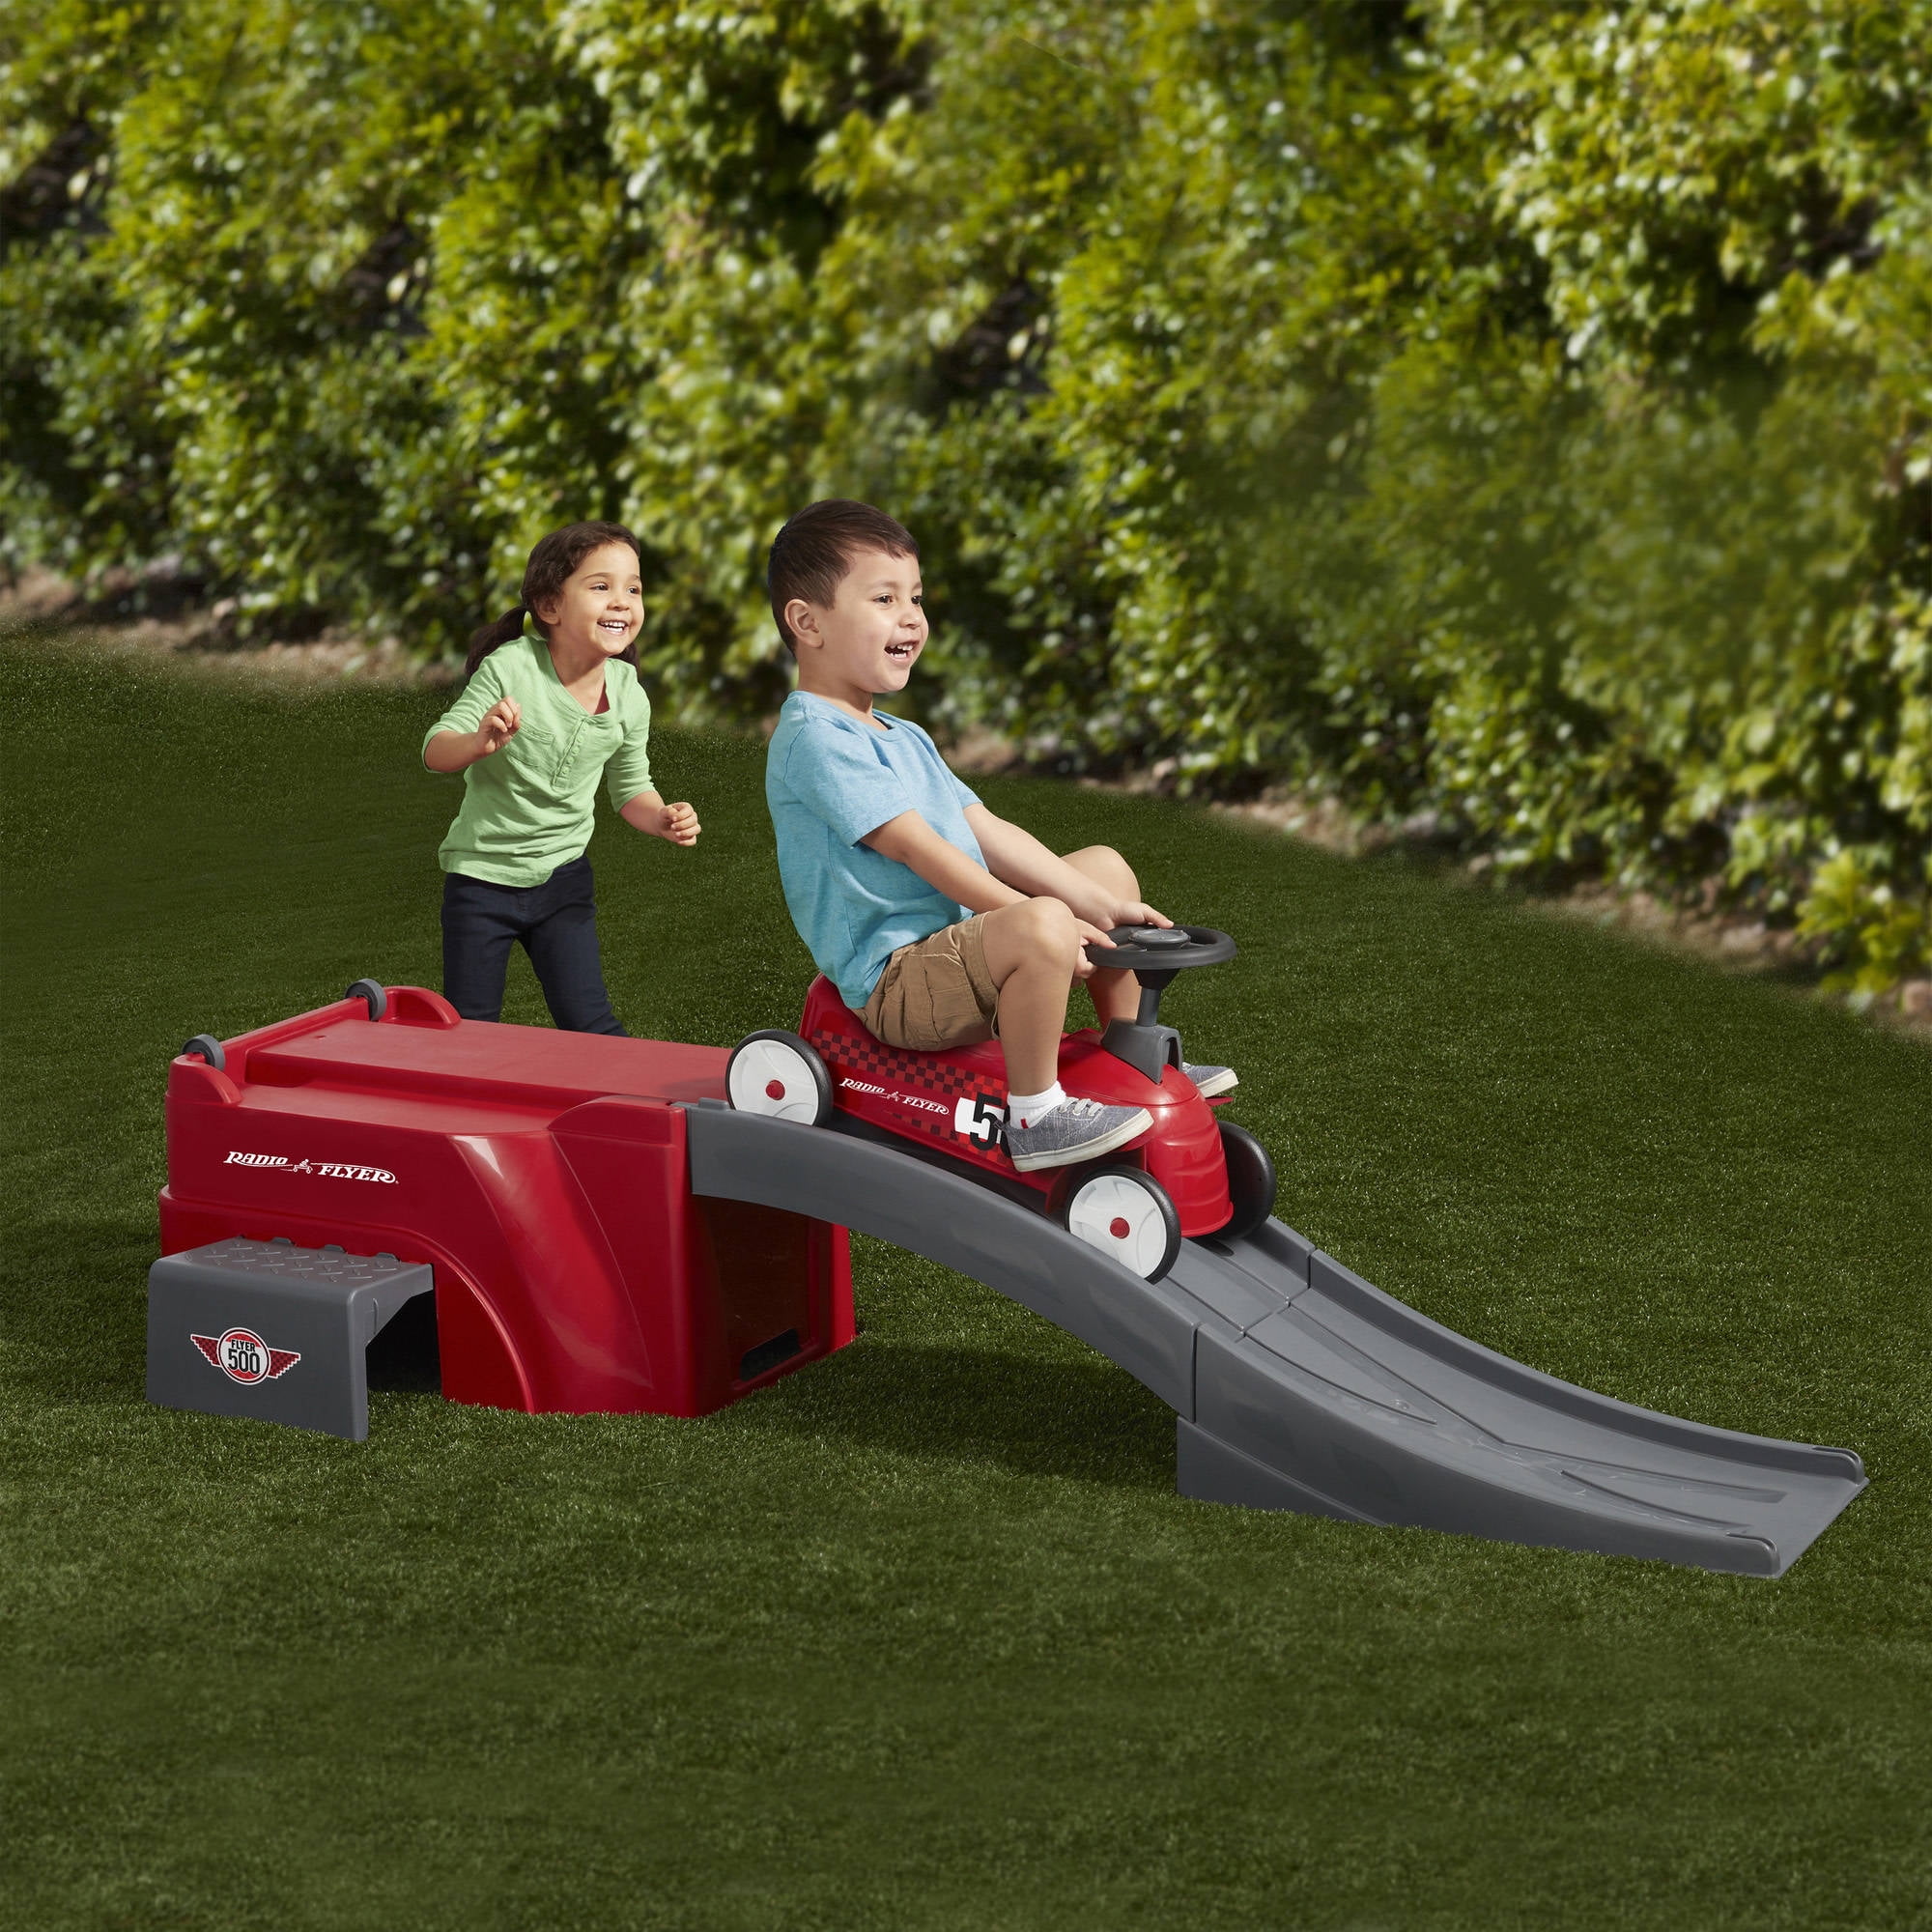 radio flyer ride on toys for toddlers